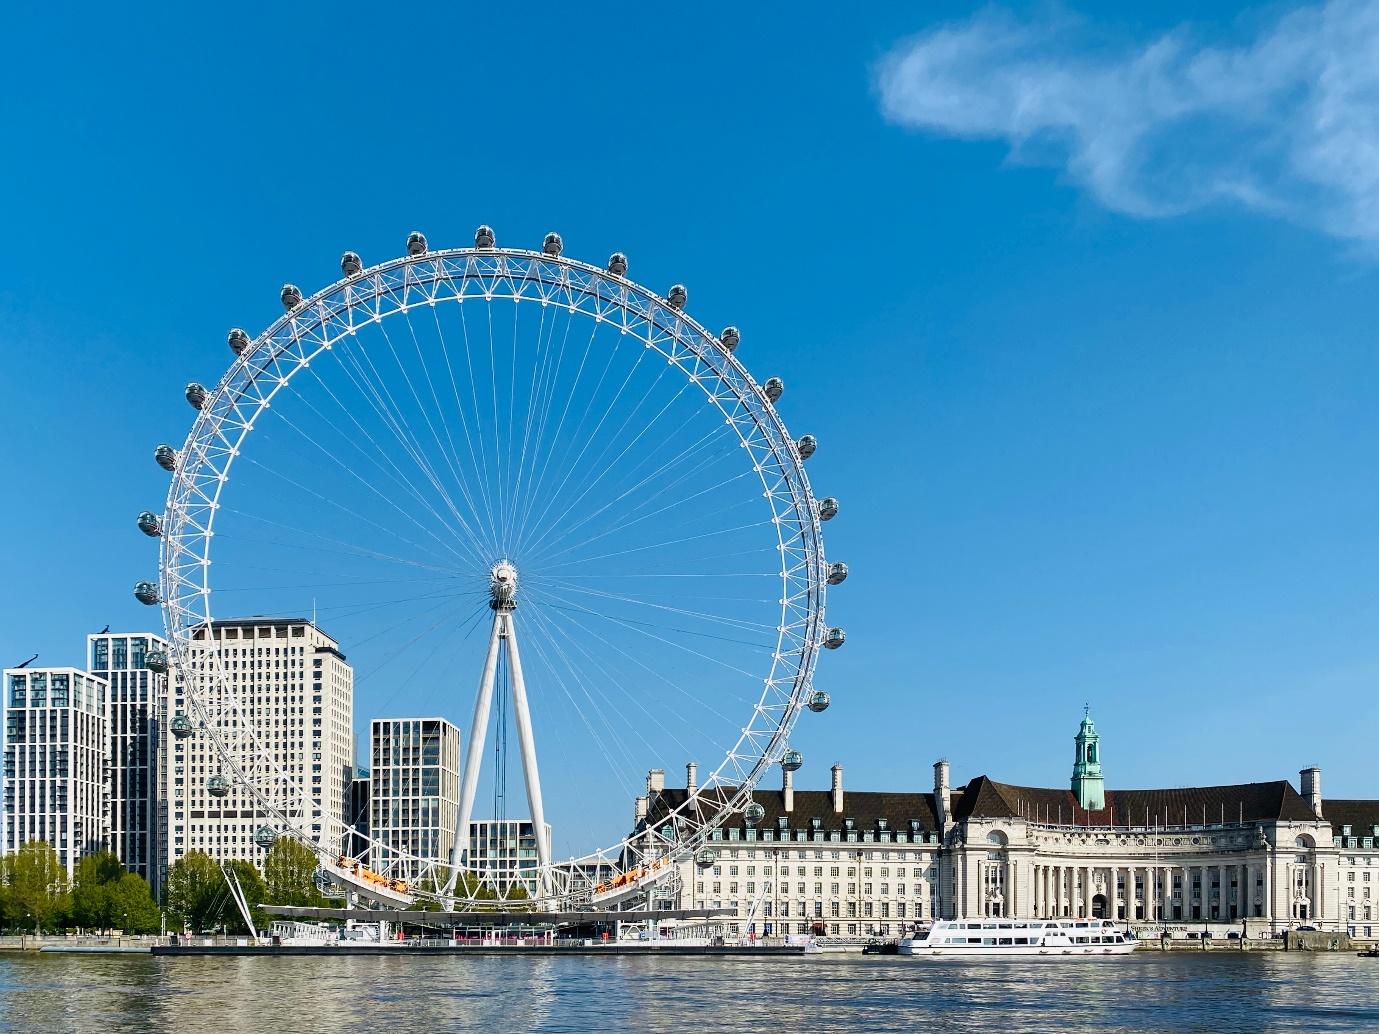 A ferris wheel in front of London Eye

Description automatically generated